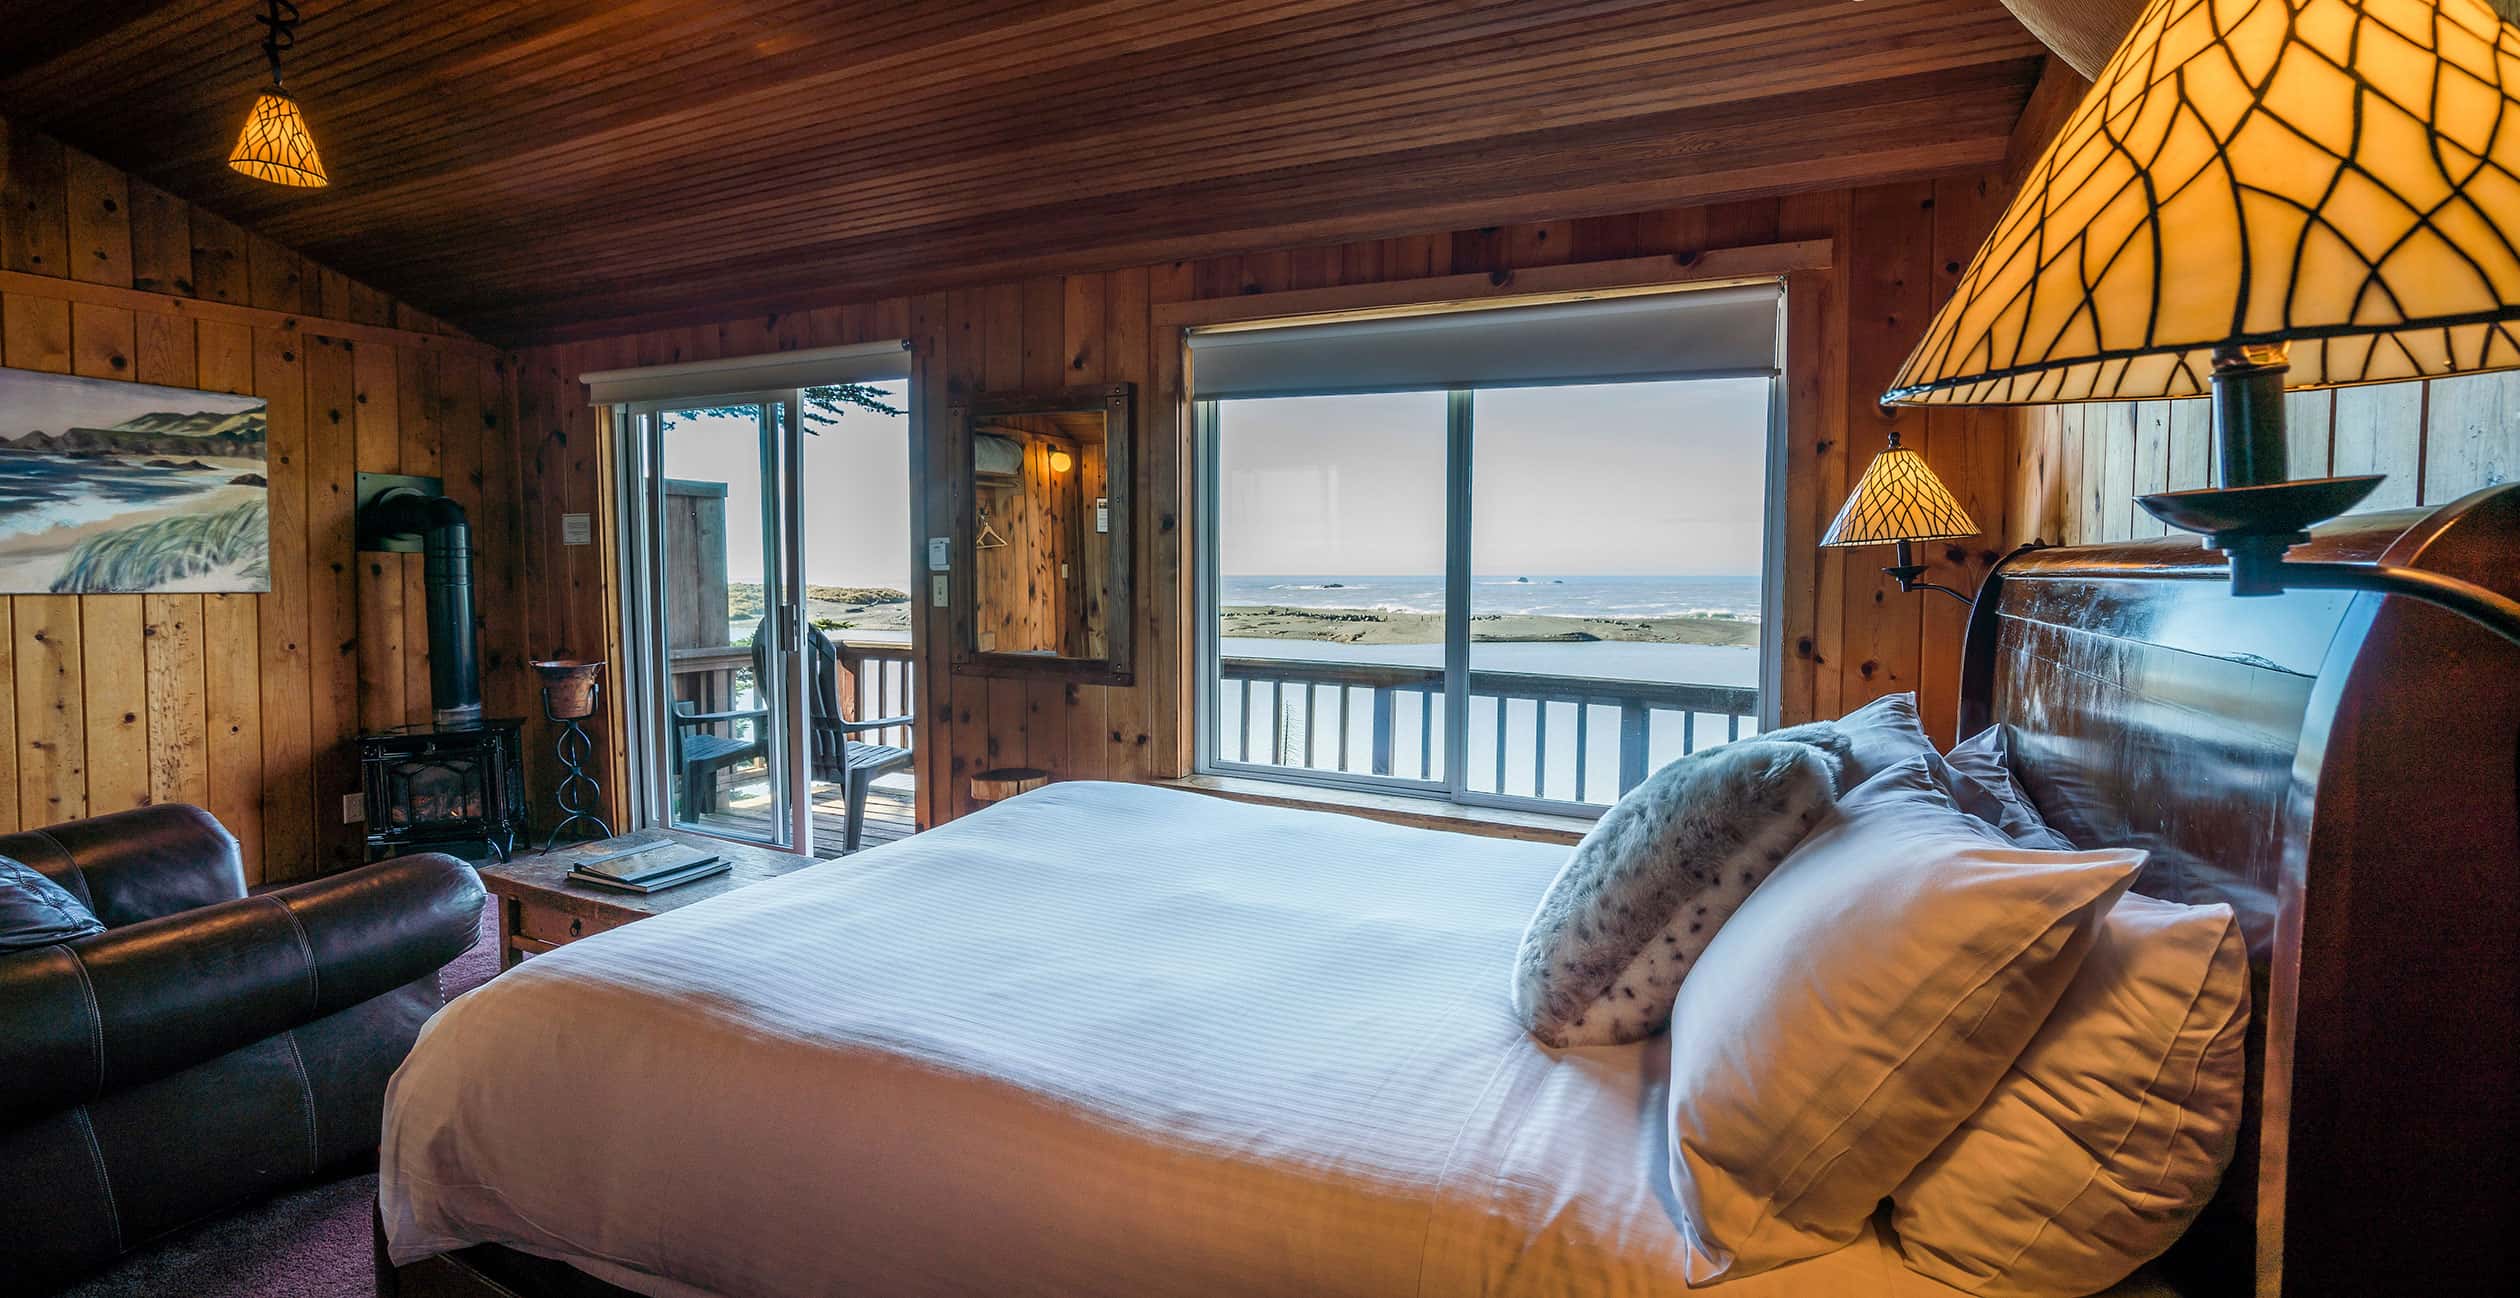 Cabin 2 bed across from windows with ocean view